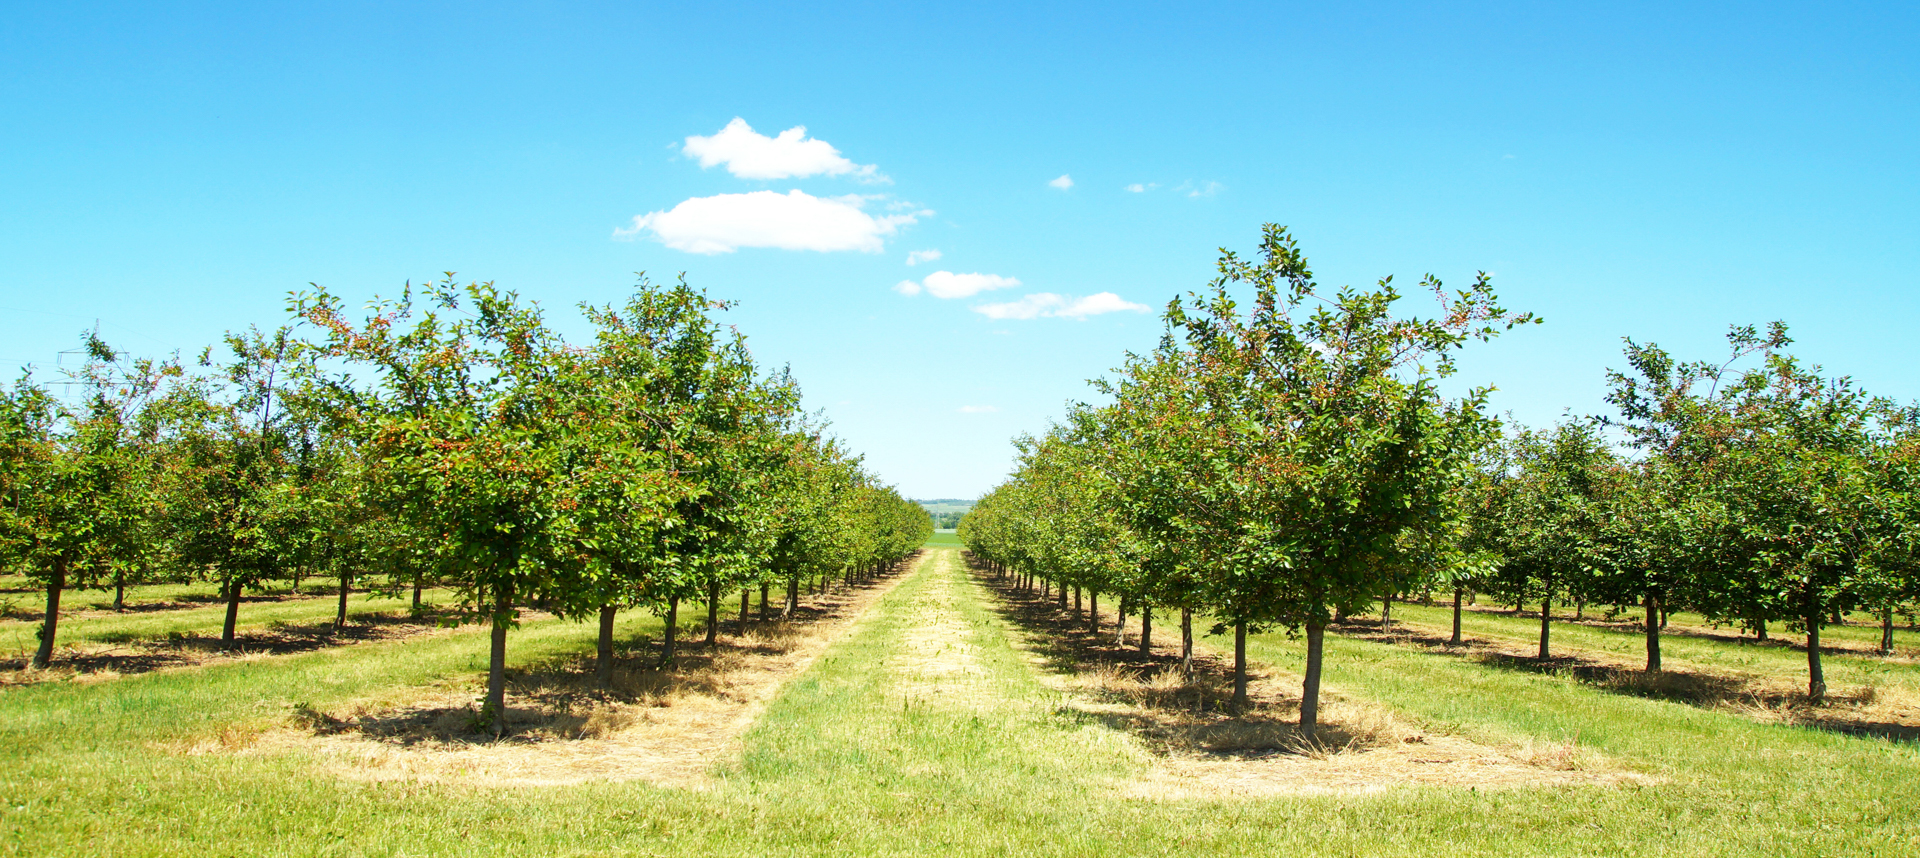 Rows of trees in a cherry tree orchard under a blue sky